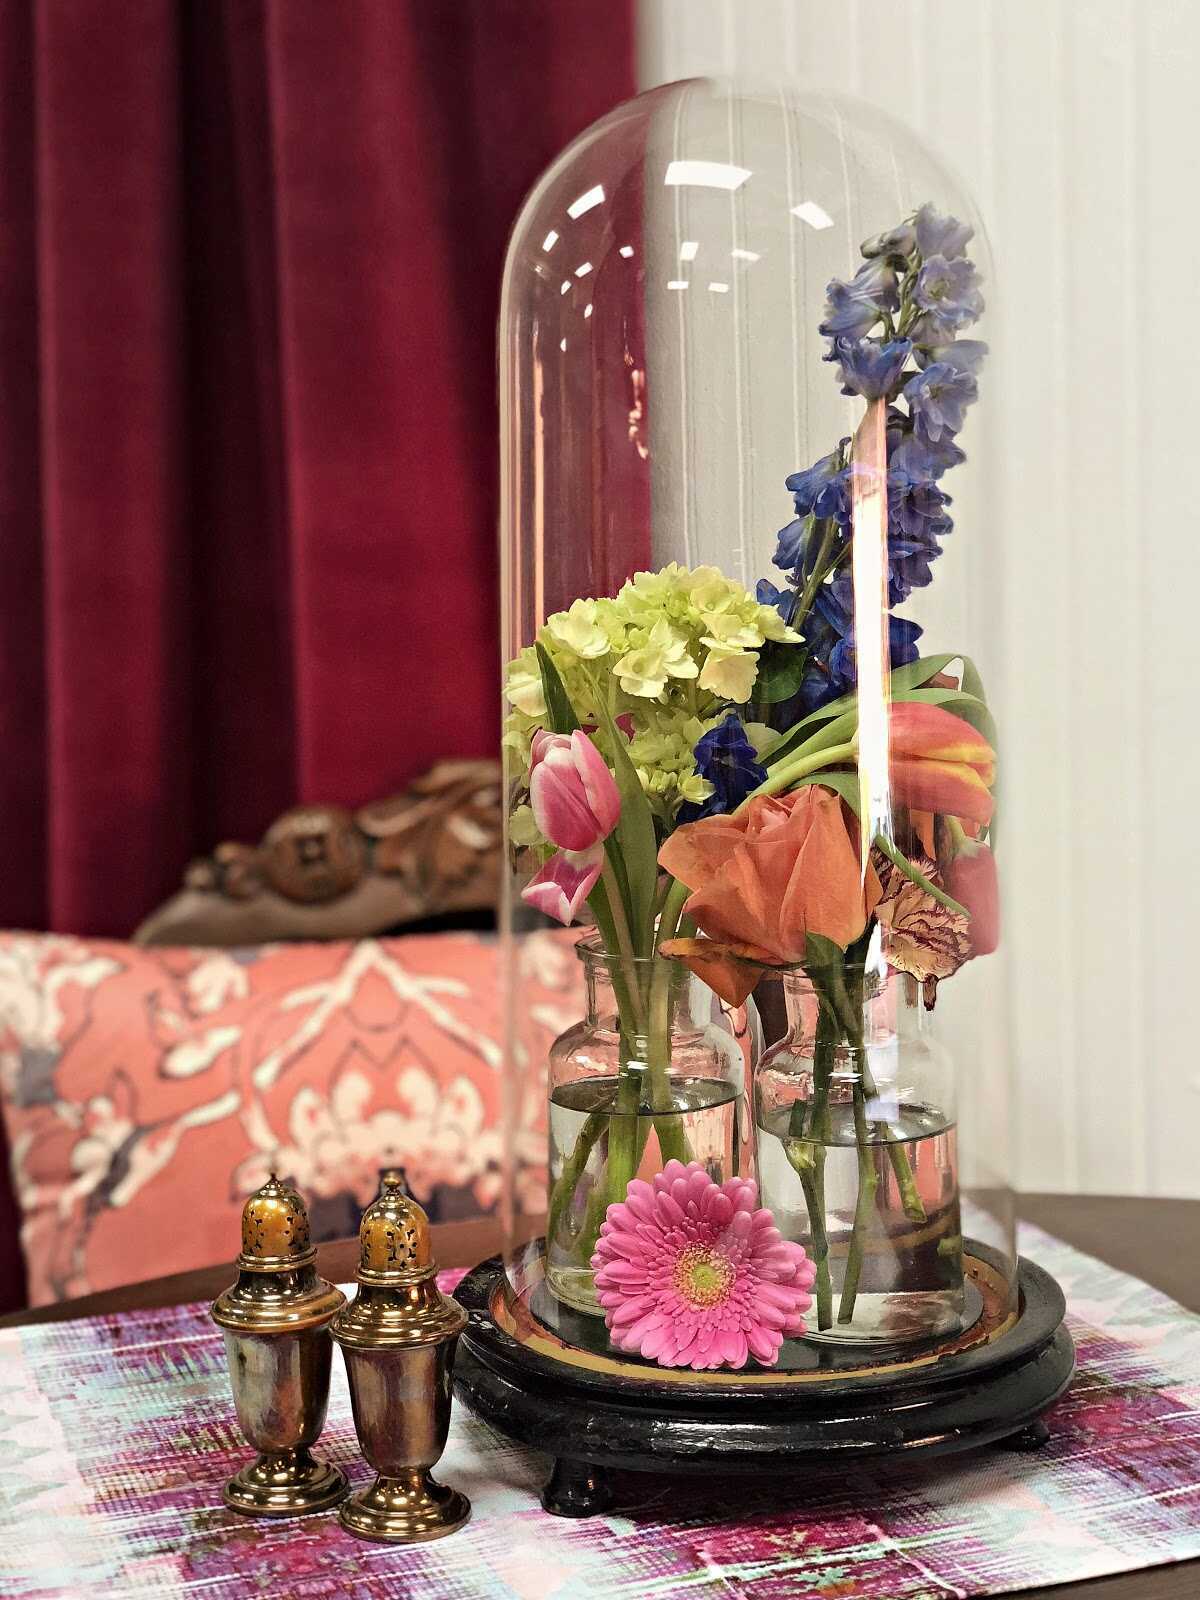 Use your nesting time to dream about spring. From tables adorned with colorful table runners to tables set with paper placemats and tassels, these spring table settings are sure to bring some much-needed joy into your life.
